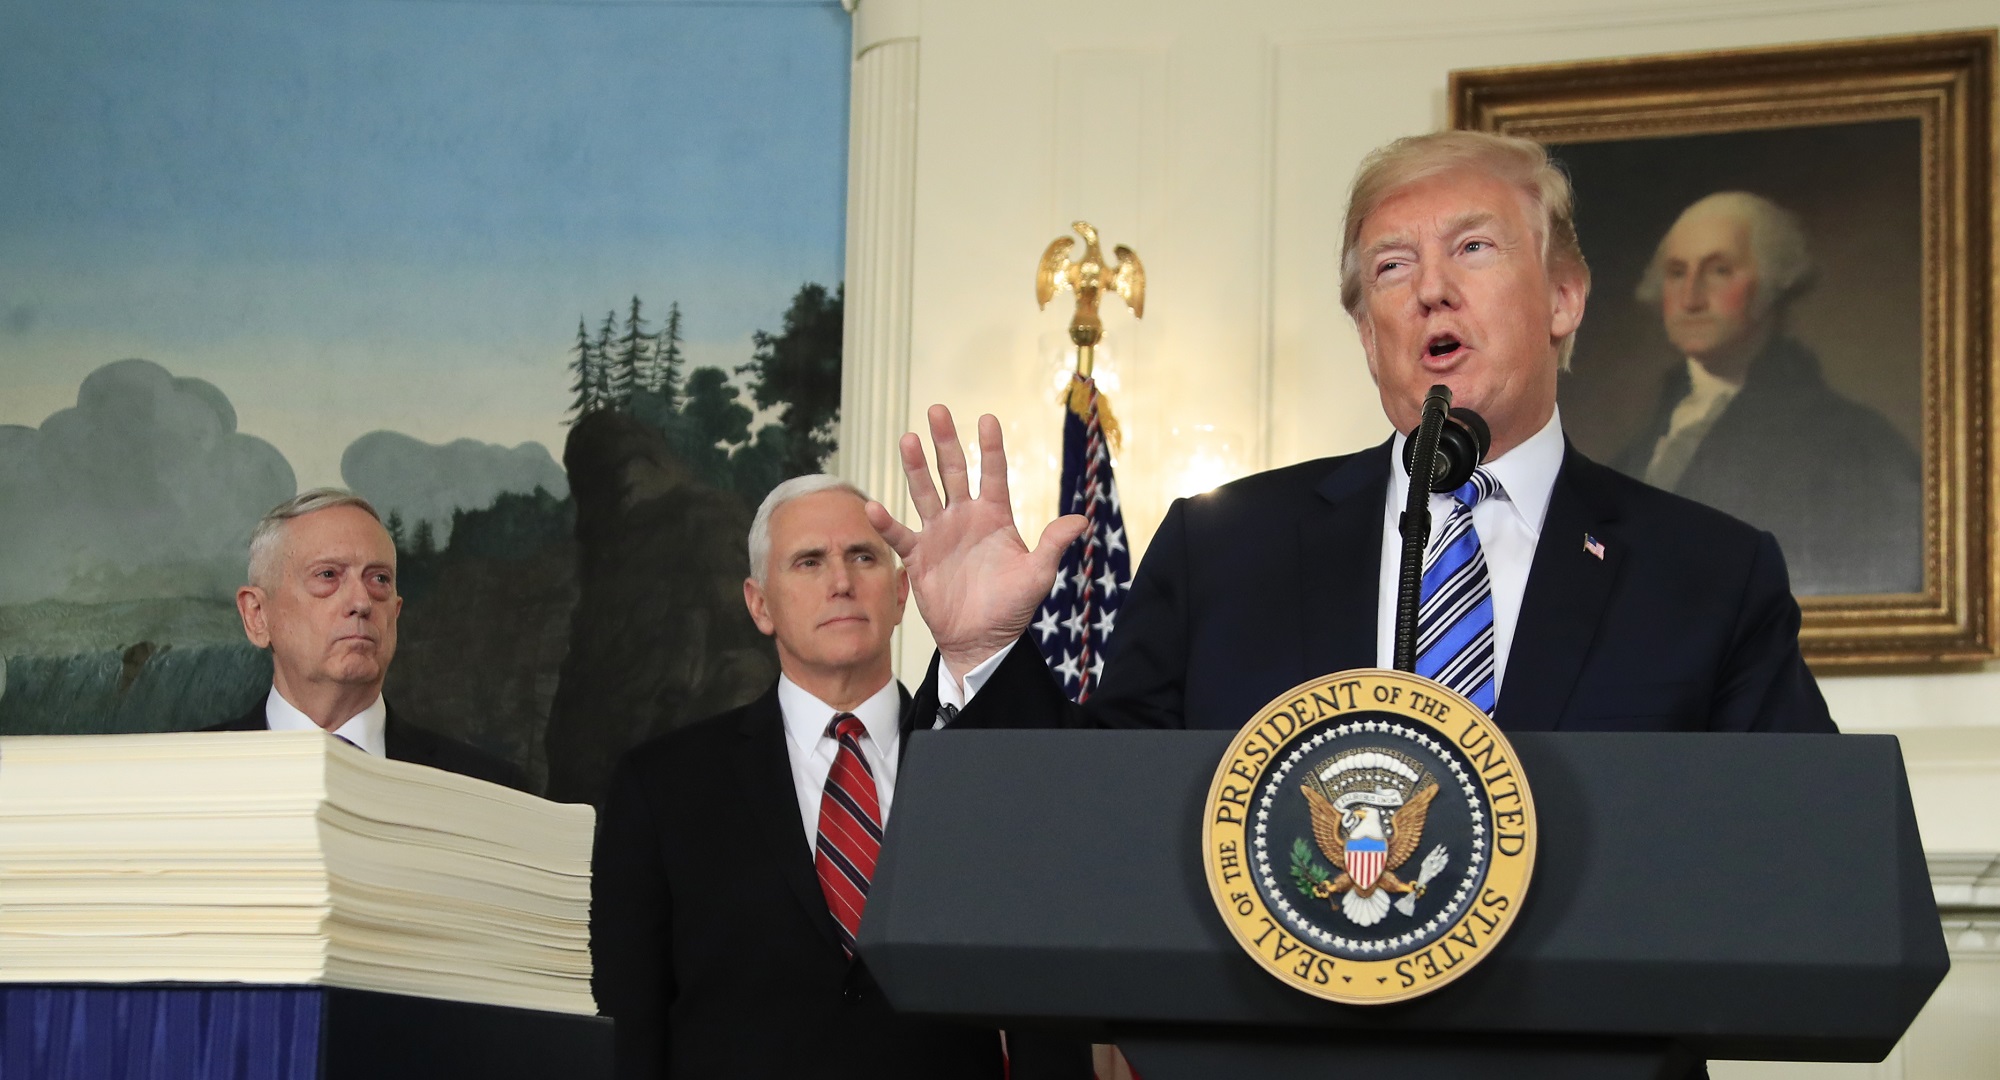 President Donald Trump with, Defense Secretary Jim Mattis, left, and Vice President Mike Pence, speaks in the Diplomatic Room of the White House in Washington, Friday, March 23, 2018, about the $1.3 trillion spending bill. (AP Photo/Manuel Balce Ceneta)